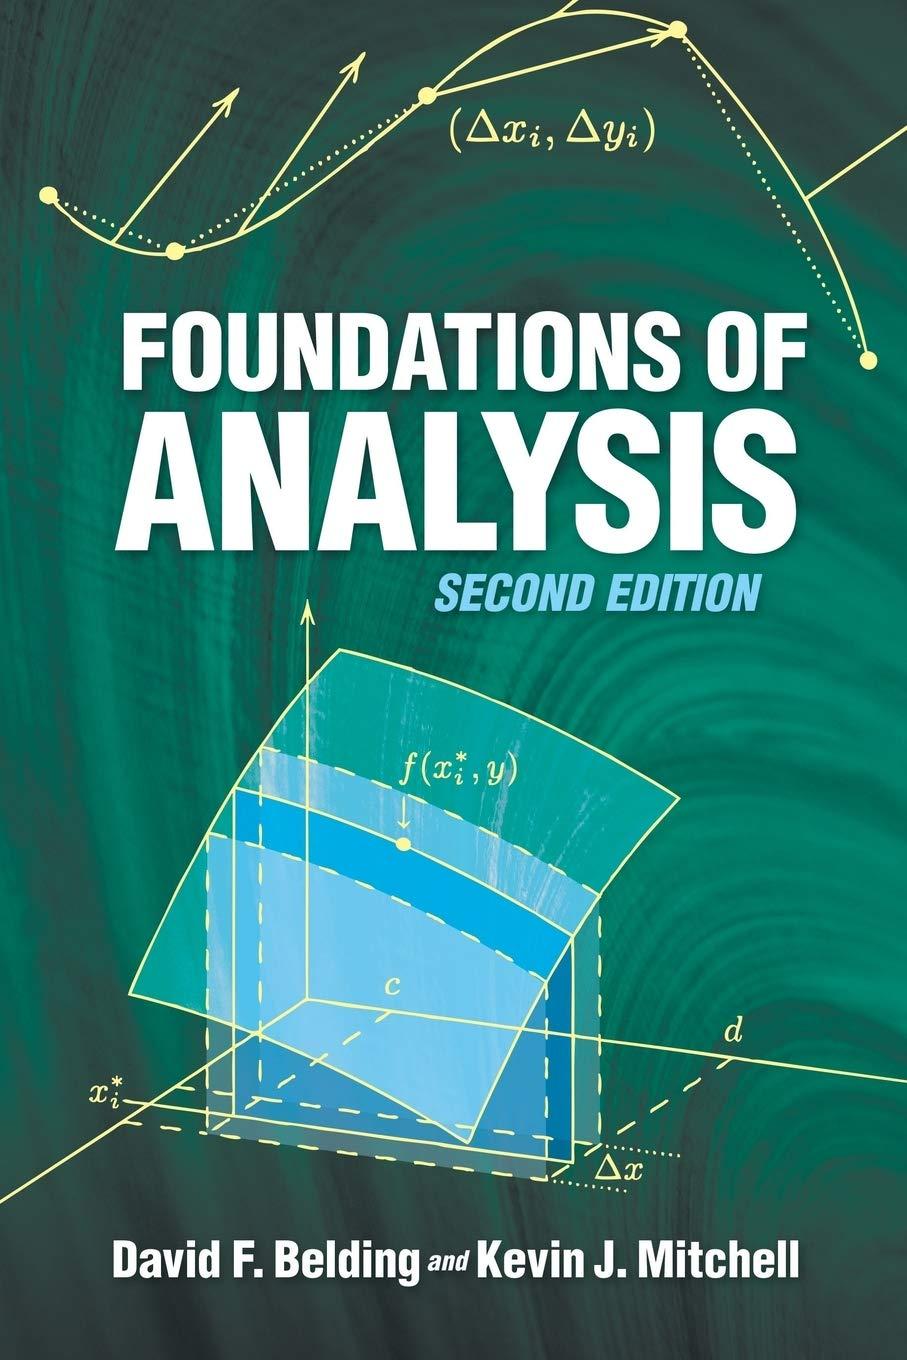 foundations of analysis 2nd edition david f belding, kevin j mitchell 048646296x, 9780486462967